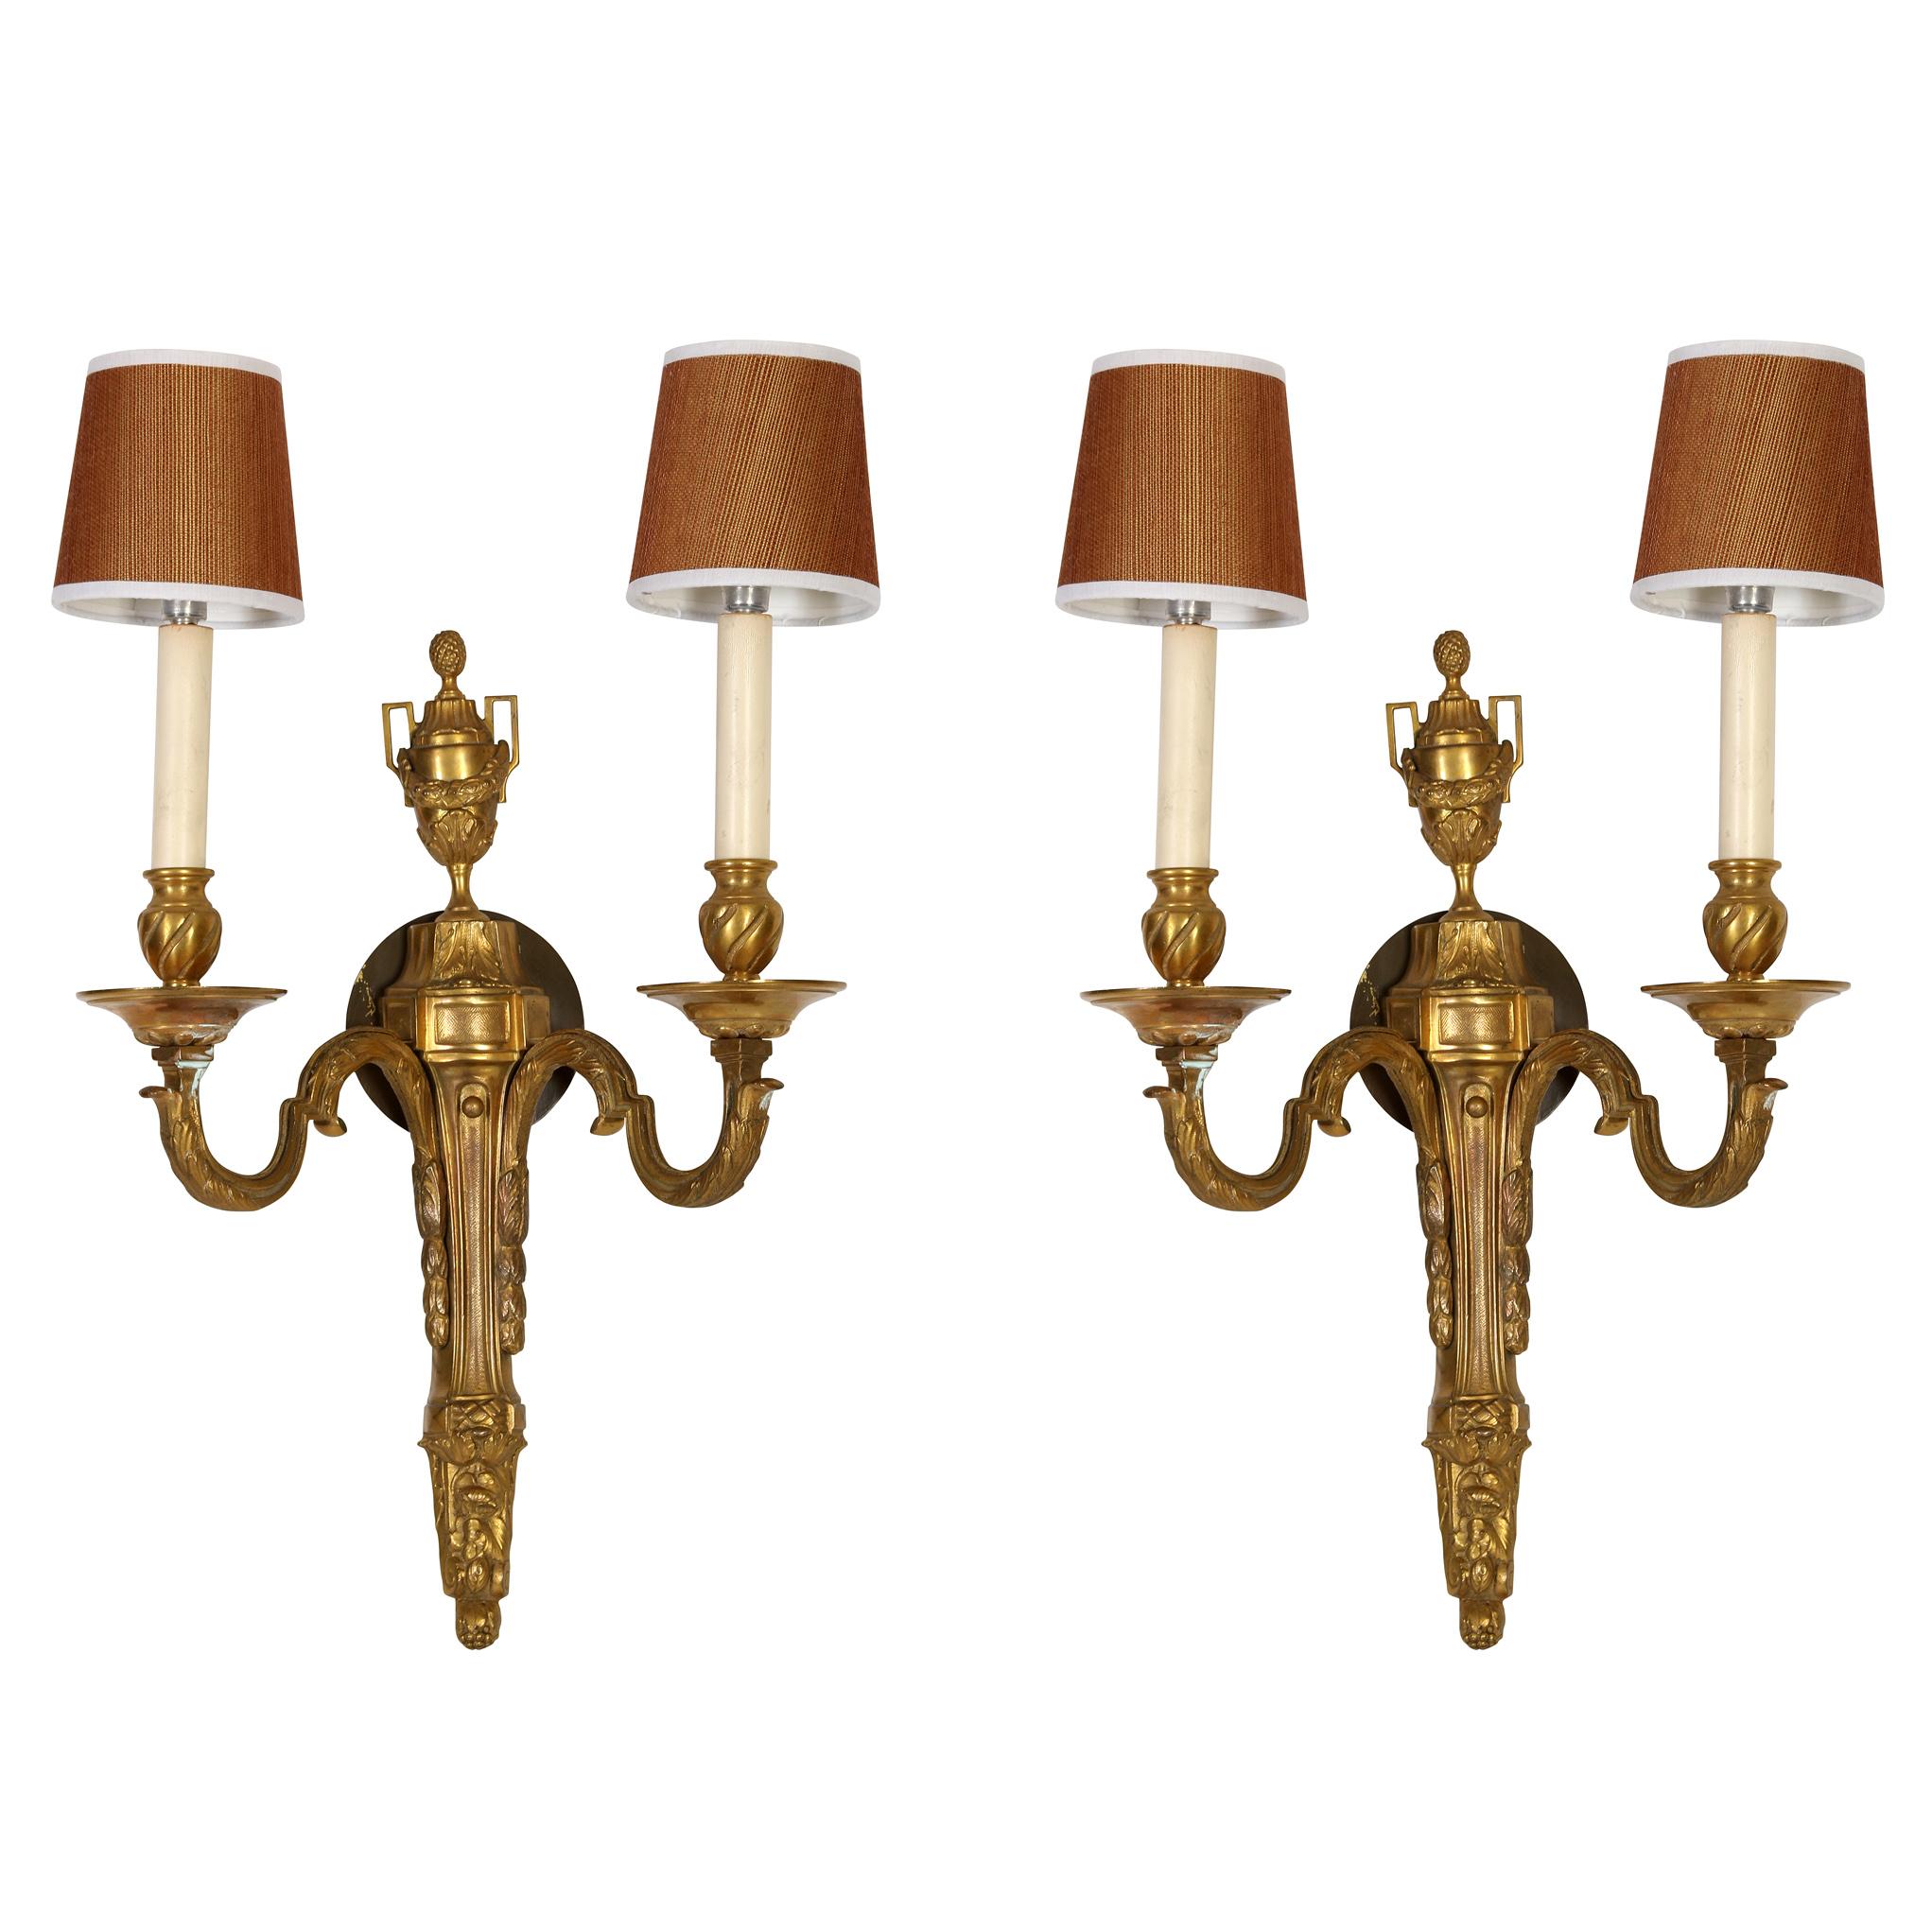 These Louis XVI style gilt bronze double arm sconces, exude timeless elegance and opulence. Crafted with attention to detail, these sconces epitomize the grandeur and refinement of the late 18th-century French aesthetic. Each sconce features